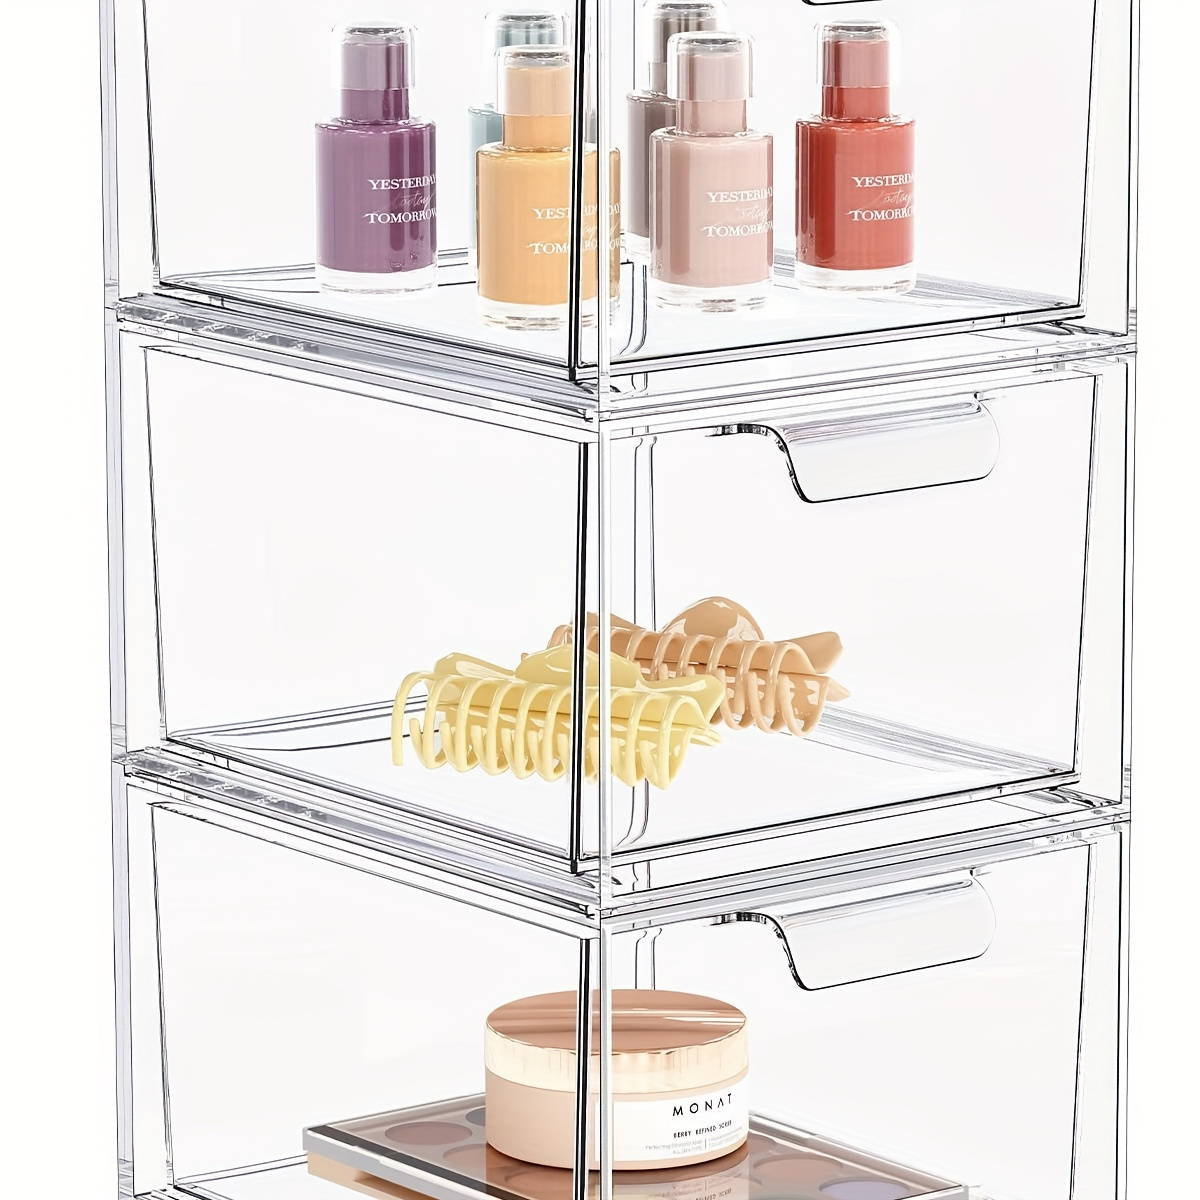 

1pc Clear Makeup Storage Organizer, Drawer Type Plastic Storage Box For Vanity, Cabinets, Dustproof Storage Box For Skincare Makeup And Sundries, Makeup Organization And Storage